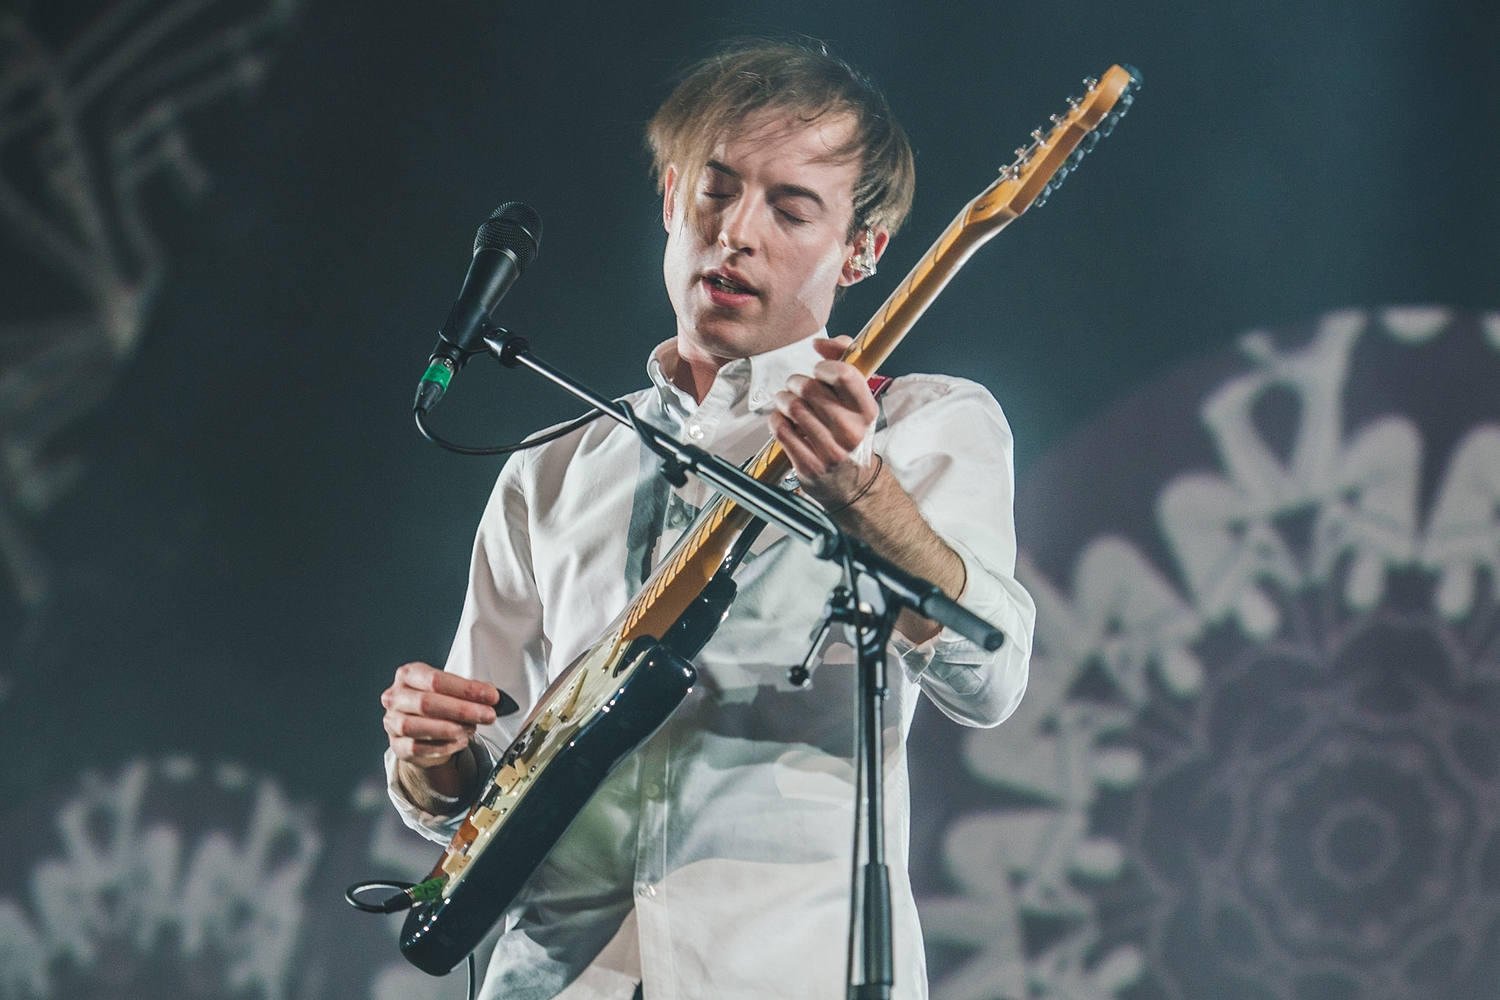 Bombay Bicycle Club announce their final warm-up show